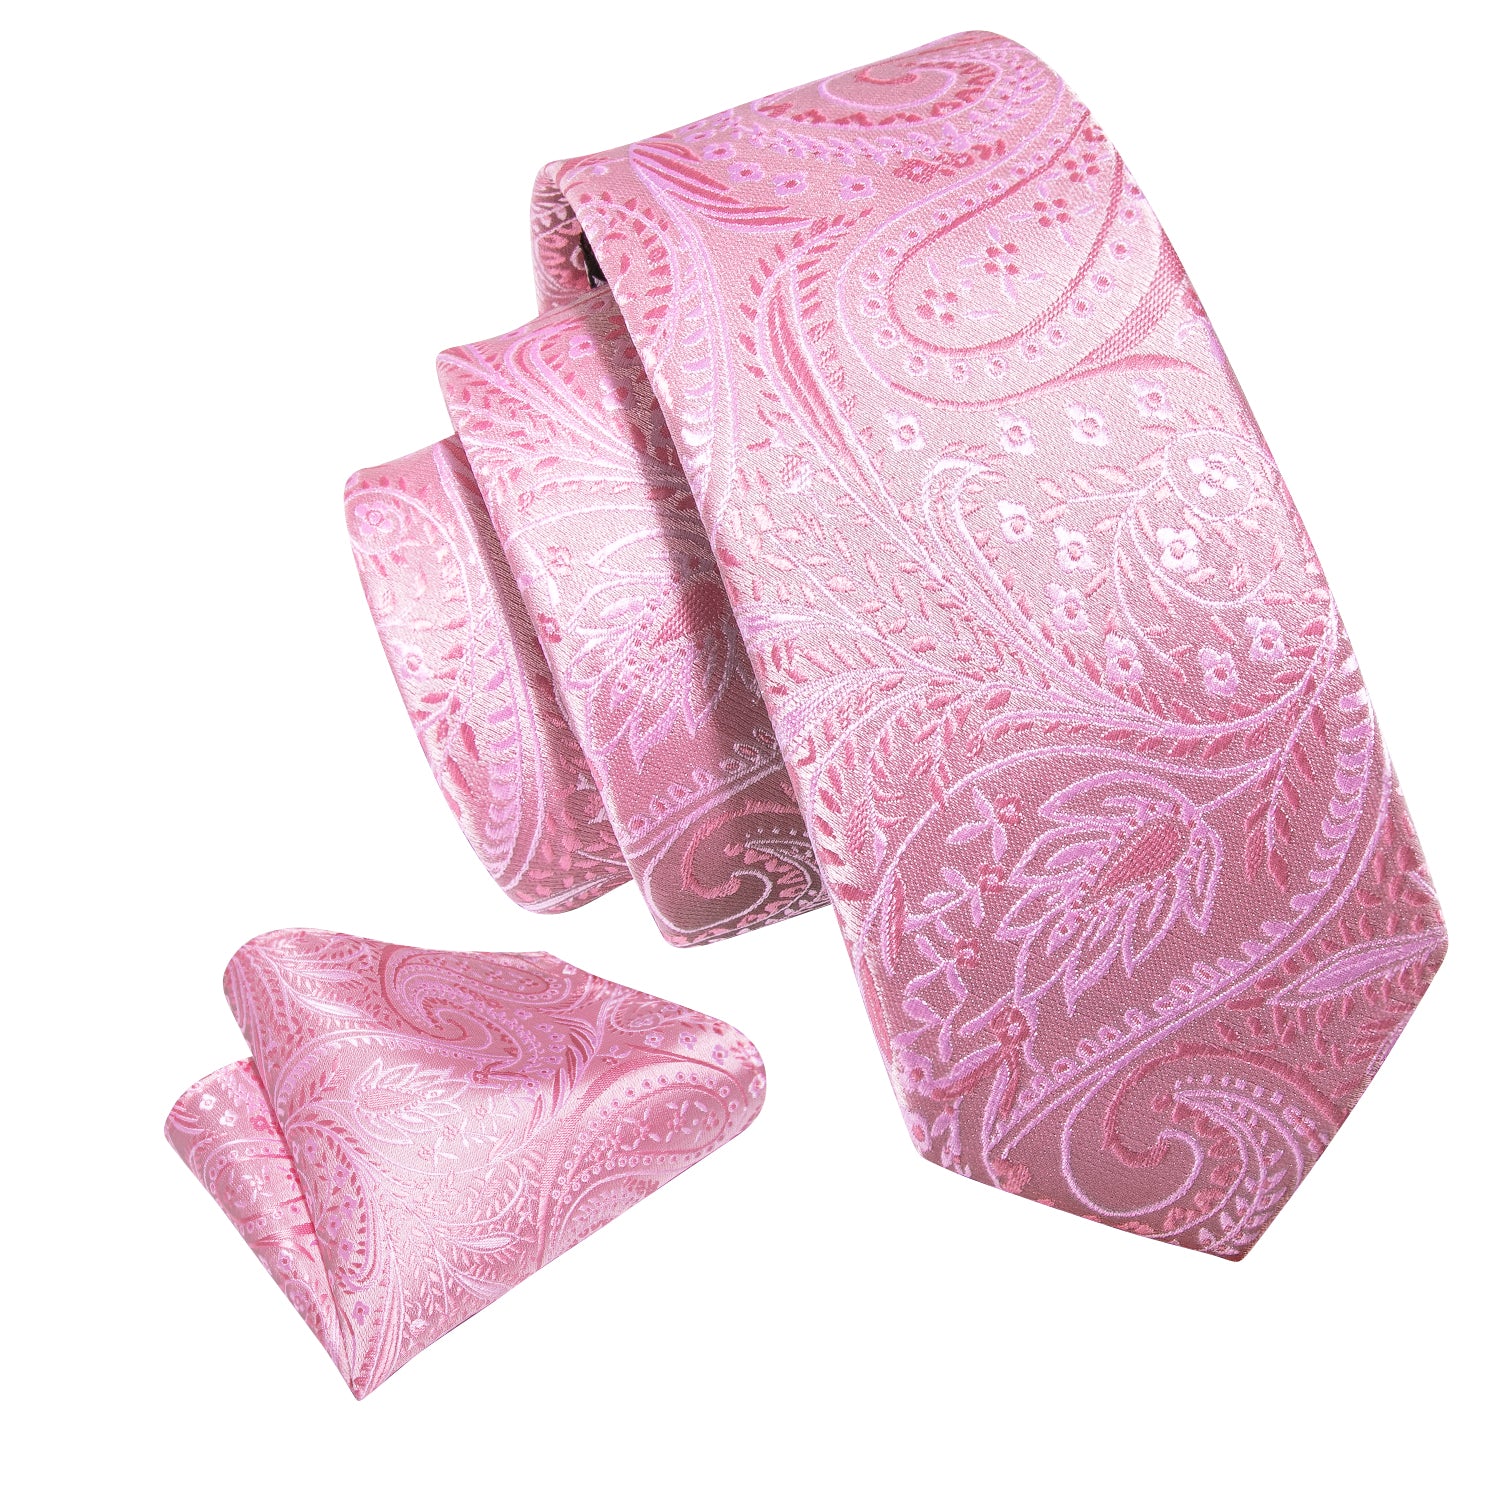 Barry.wang Kids Tie Pink Woven Paisley Children Tie Pocket Square Set